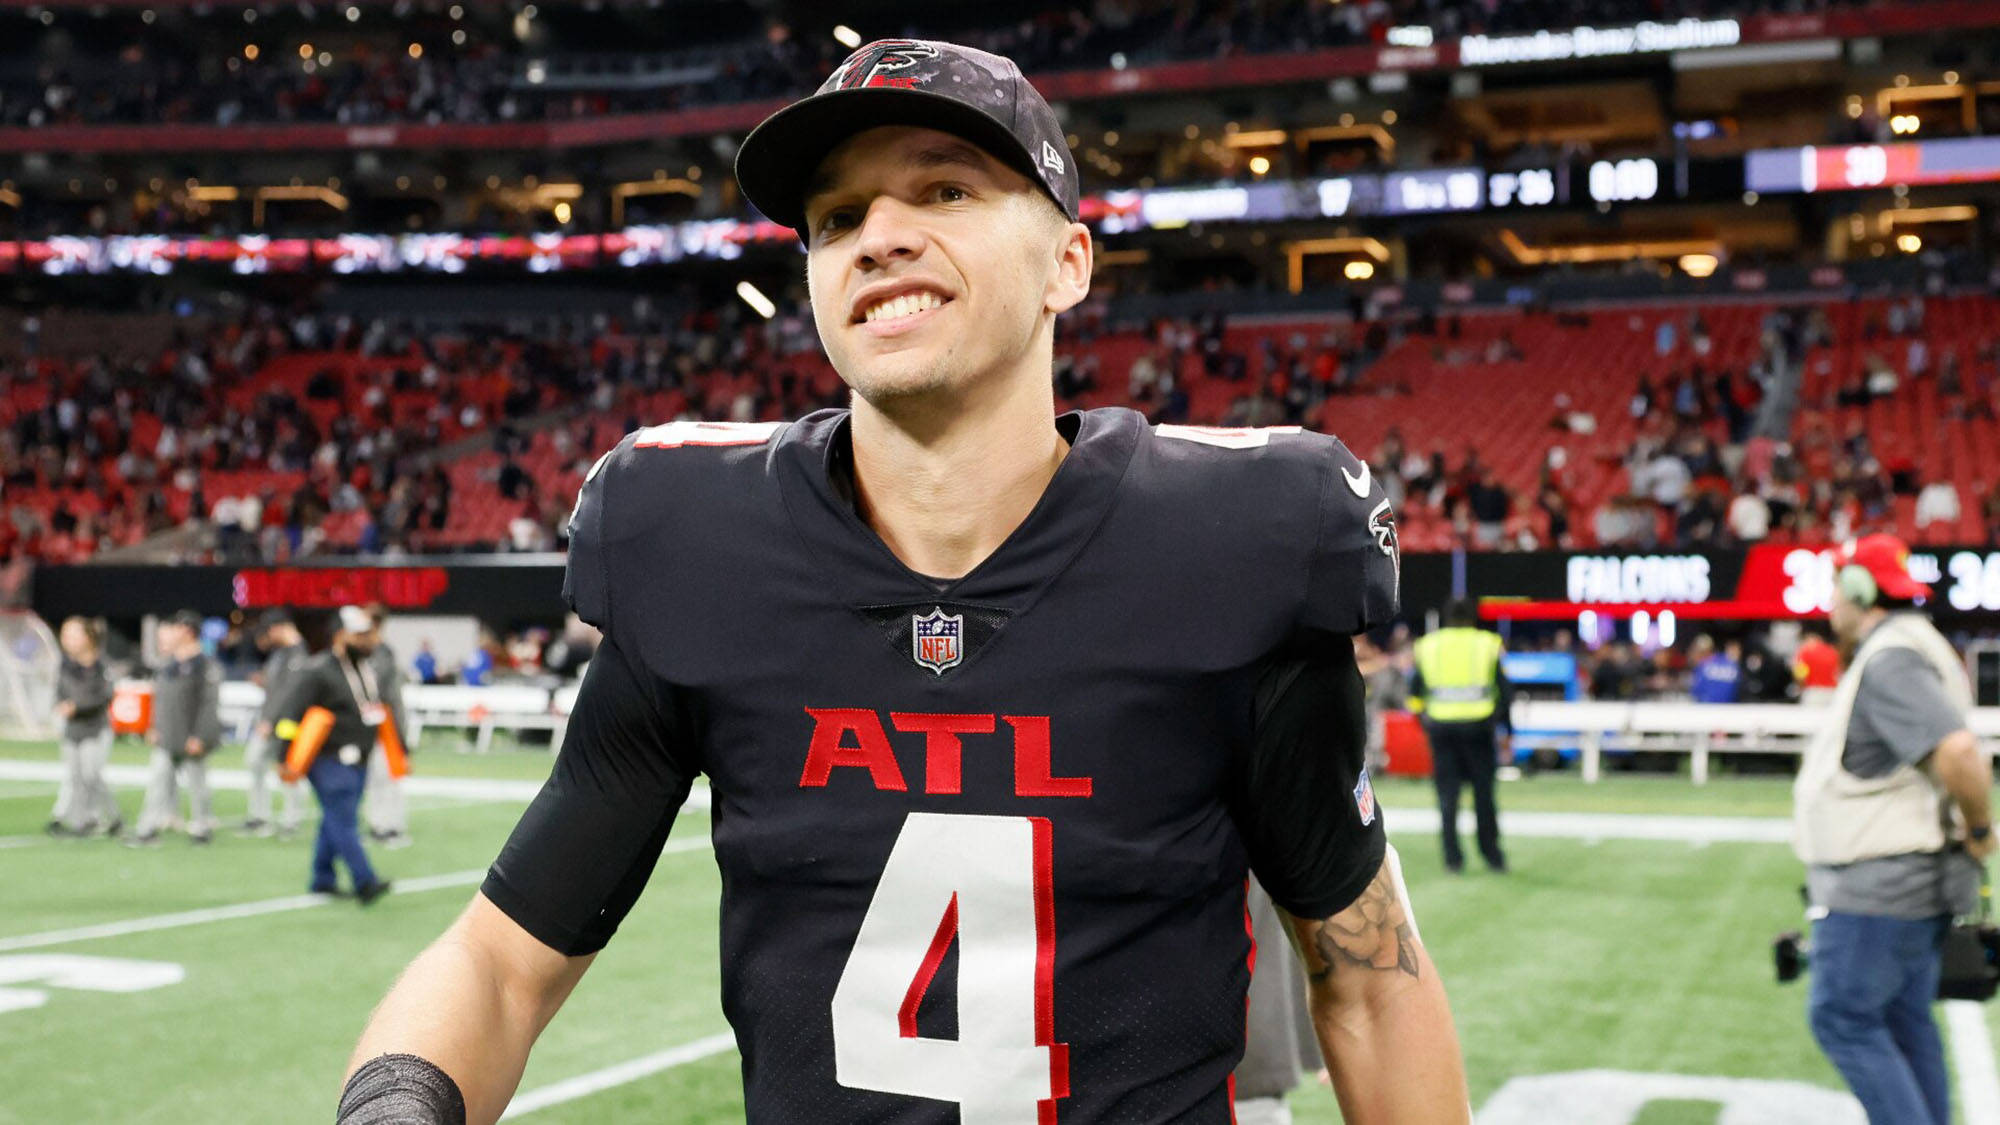 January 13, 2023: Atlanta Falcons quarterback Desmond Ridder 4 walks off the field after a 30-17 win against the Tampa Bay Buccaneers at Mercedes-Benz Stadium on Jan. 8, 2023, in Atlanta. - ZUMAm67_ 0199120557st Copyright: xMiguelxMartinezx